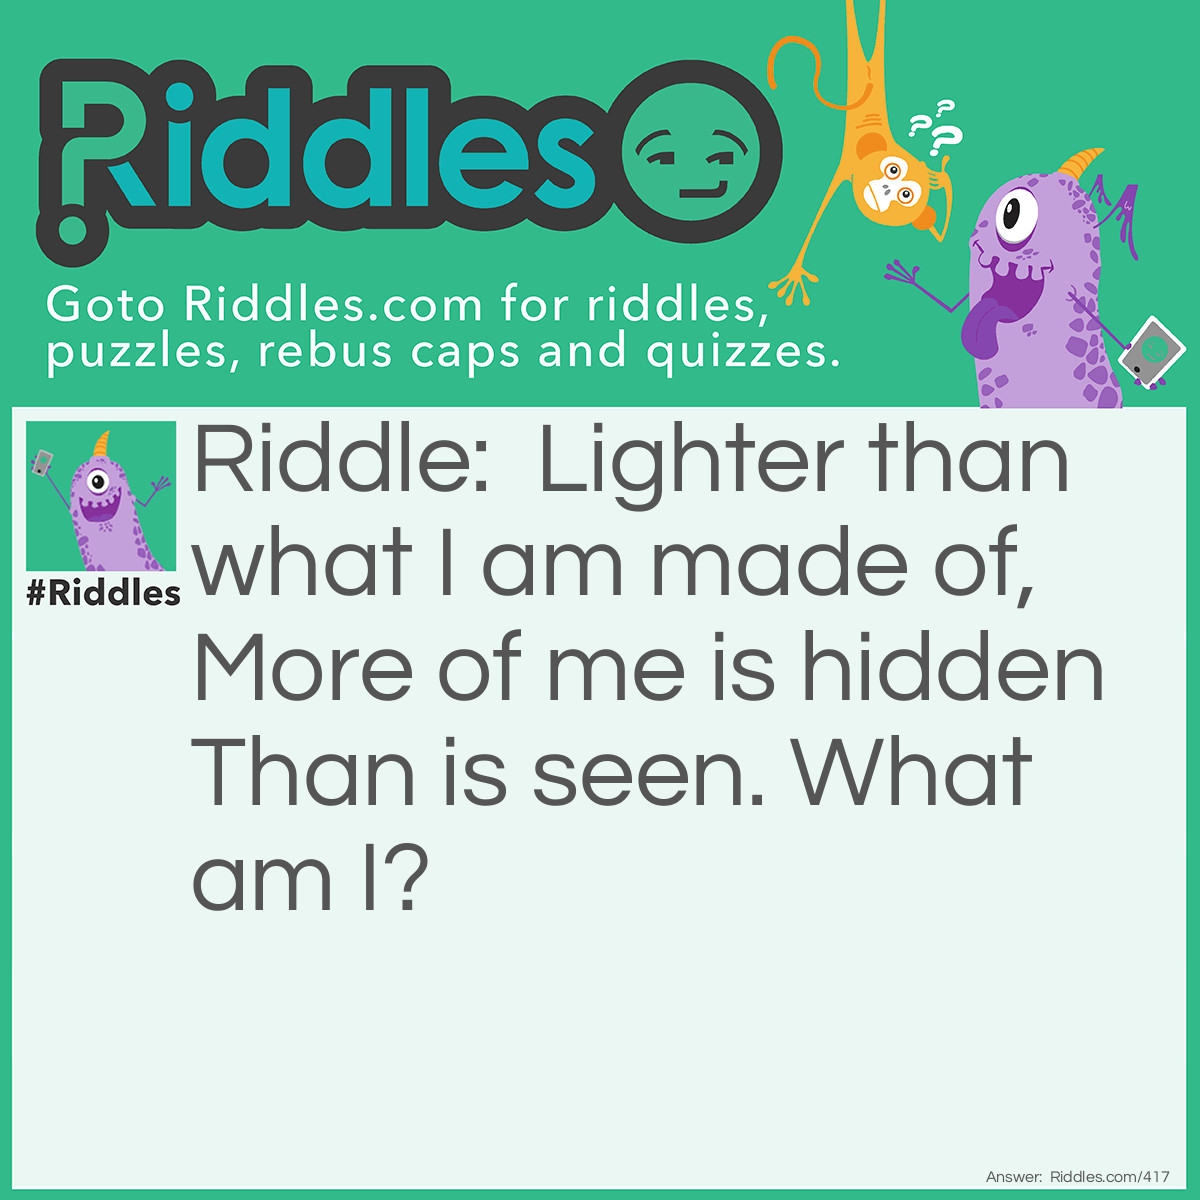 Riddle: Lighter than what I am made of, More of me is hidden Than is seen. What am I? Answer: An iceberg.